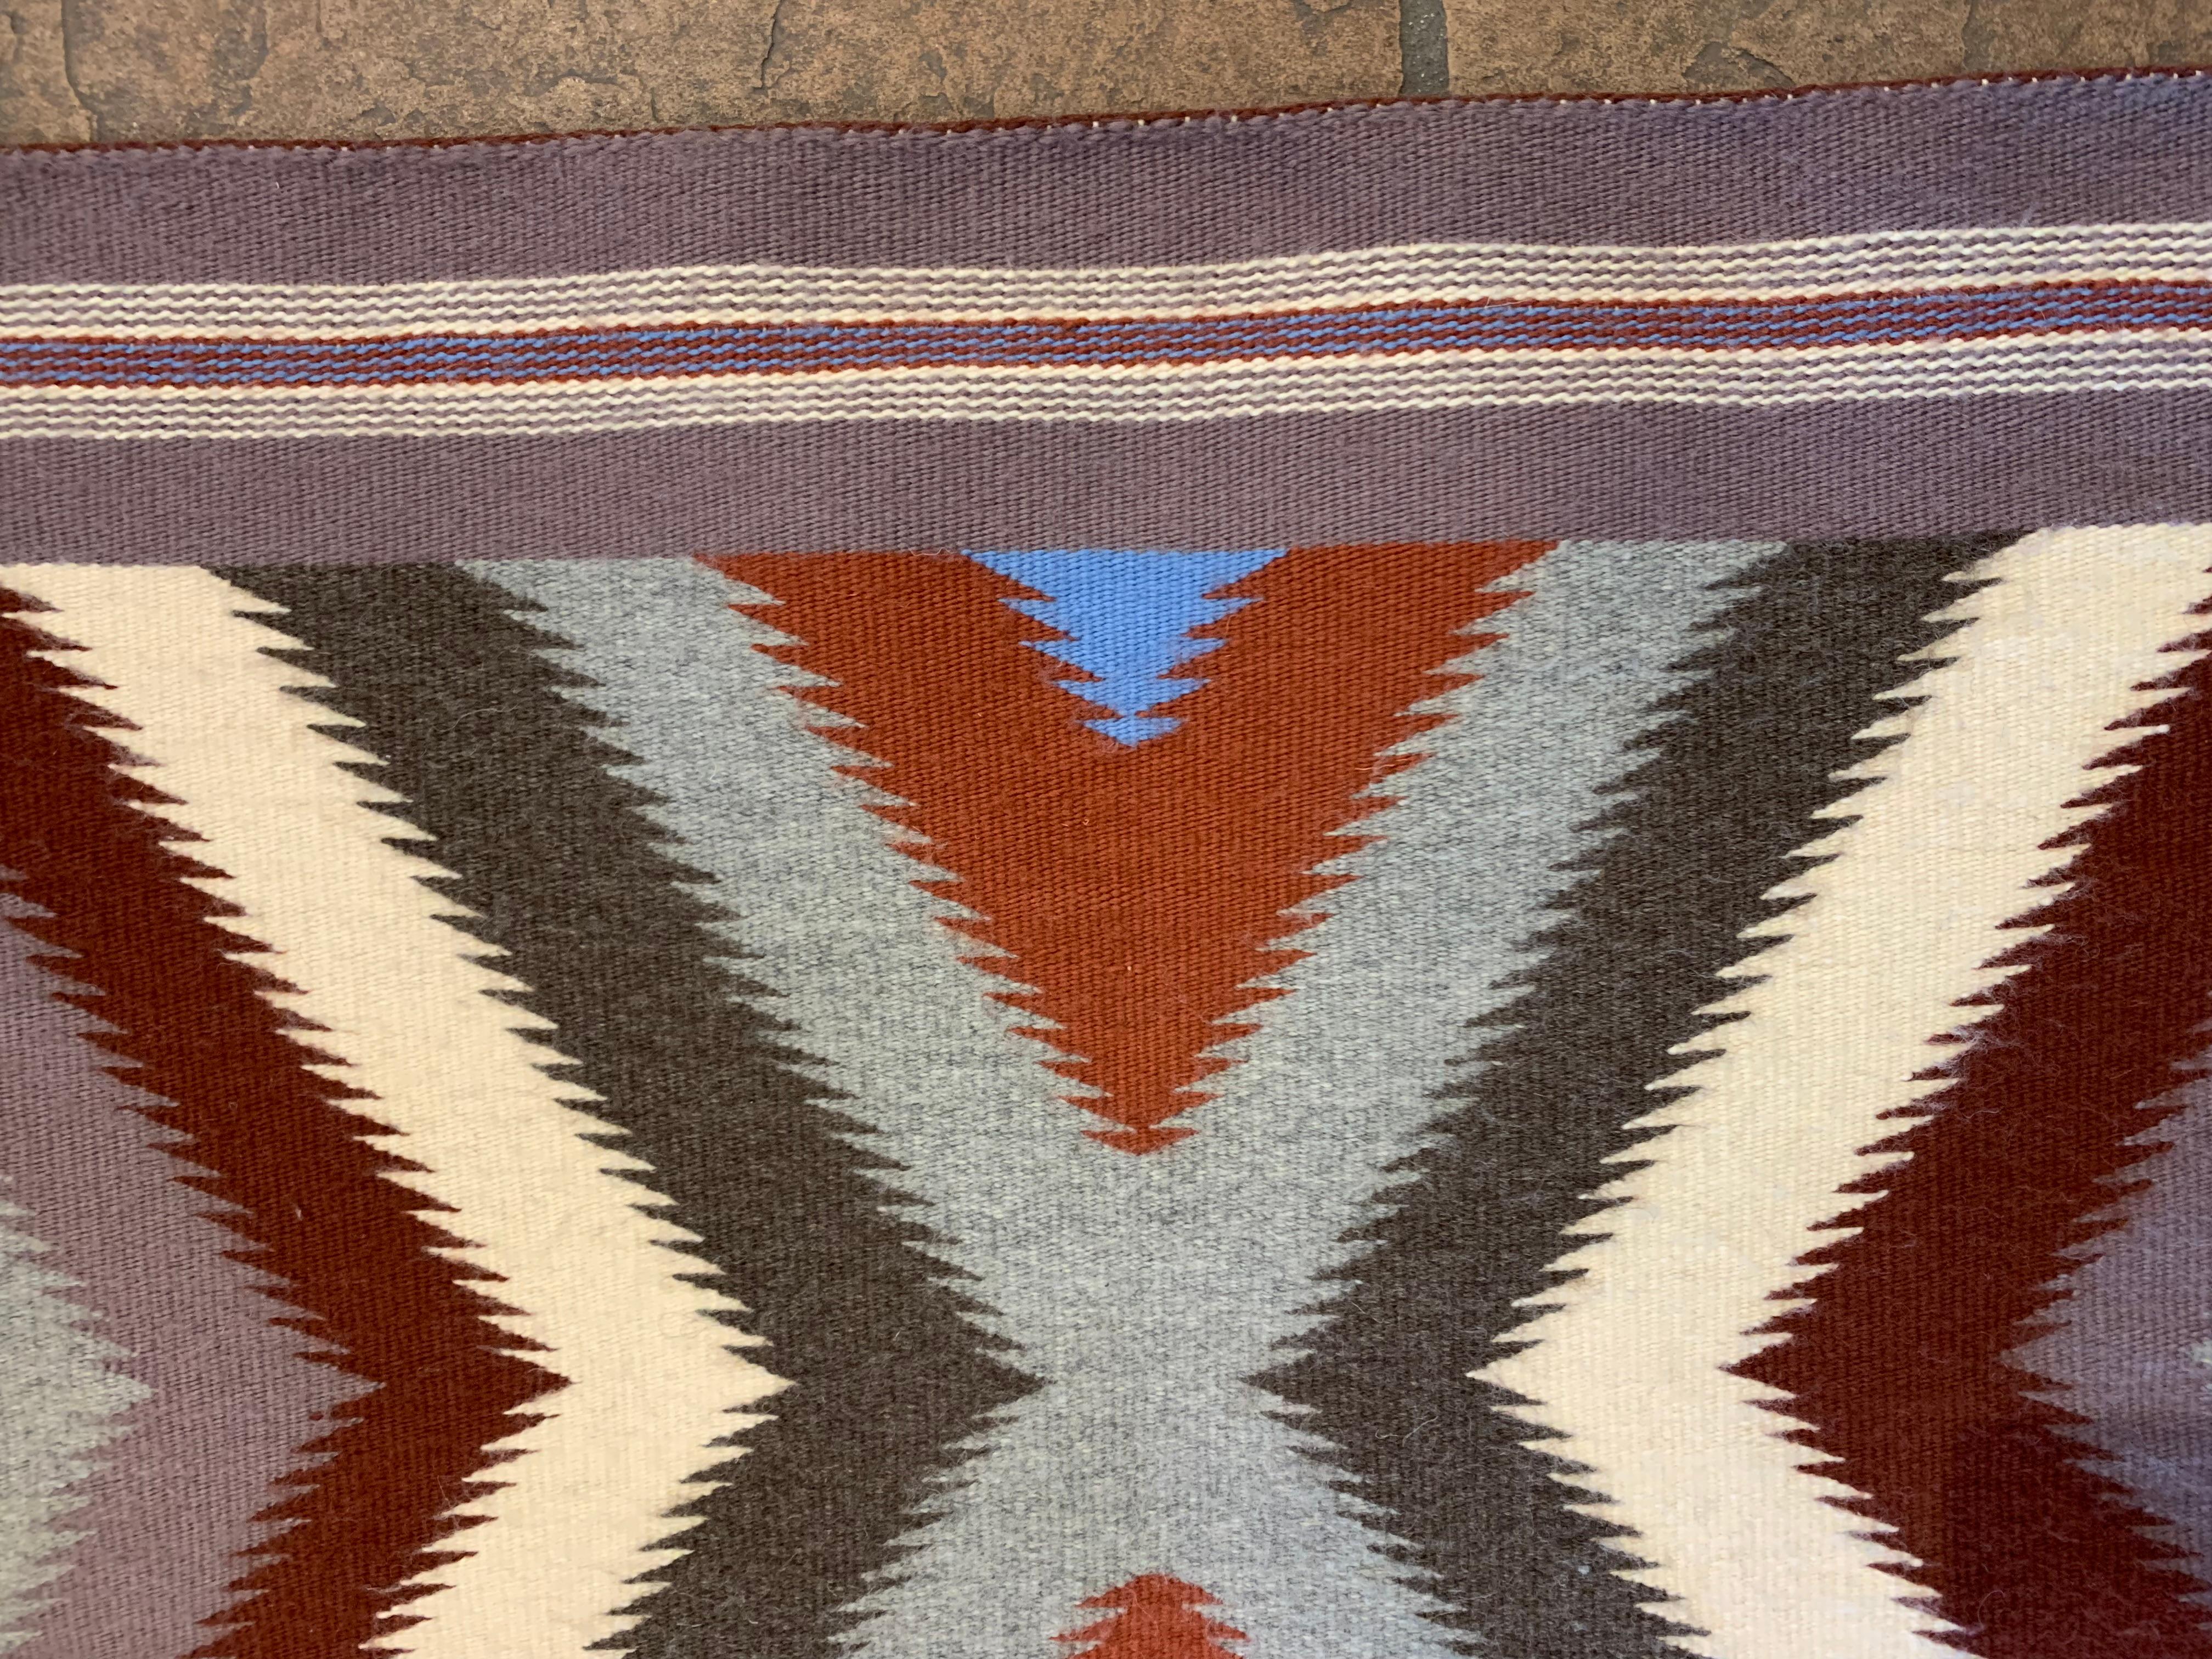 Red Mesa style Navajo rug with bands of gray, dark red, blue and white in triangular pastel patterns.  
This contemporary hand woven wool rug from the Four Corners area was woven in the 1990’s.  29” x 48”.   

Most of the Four Corners region belongs